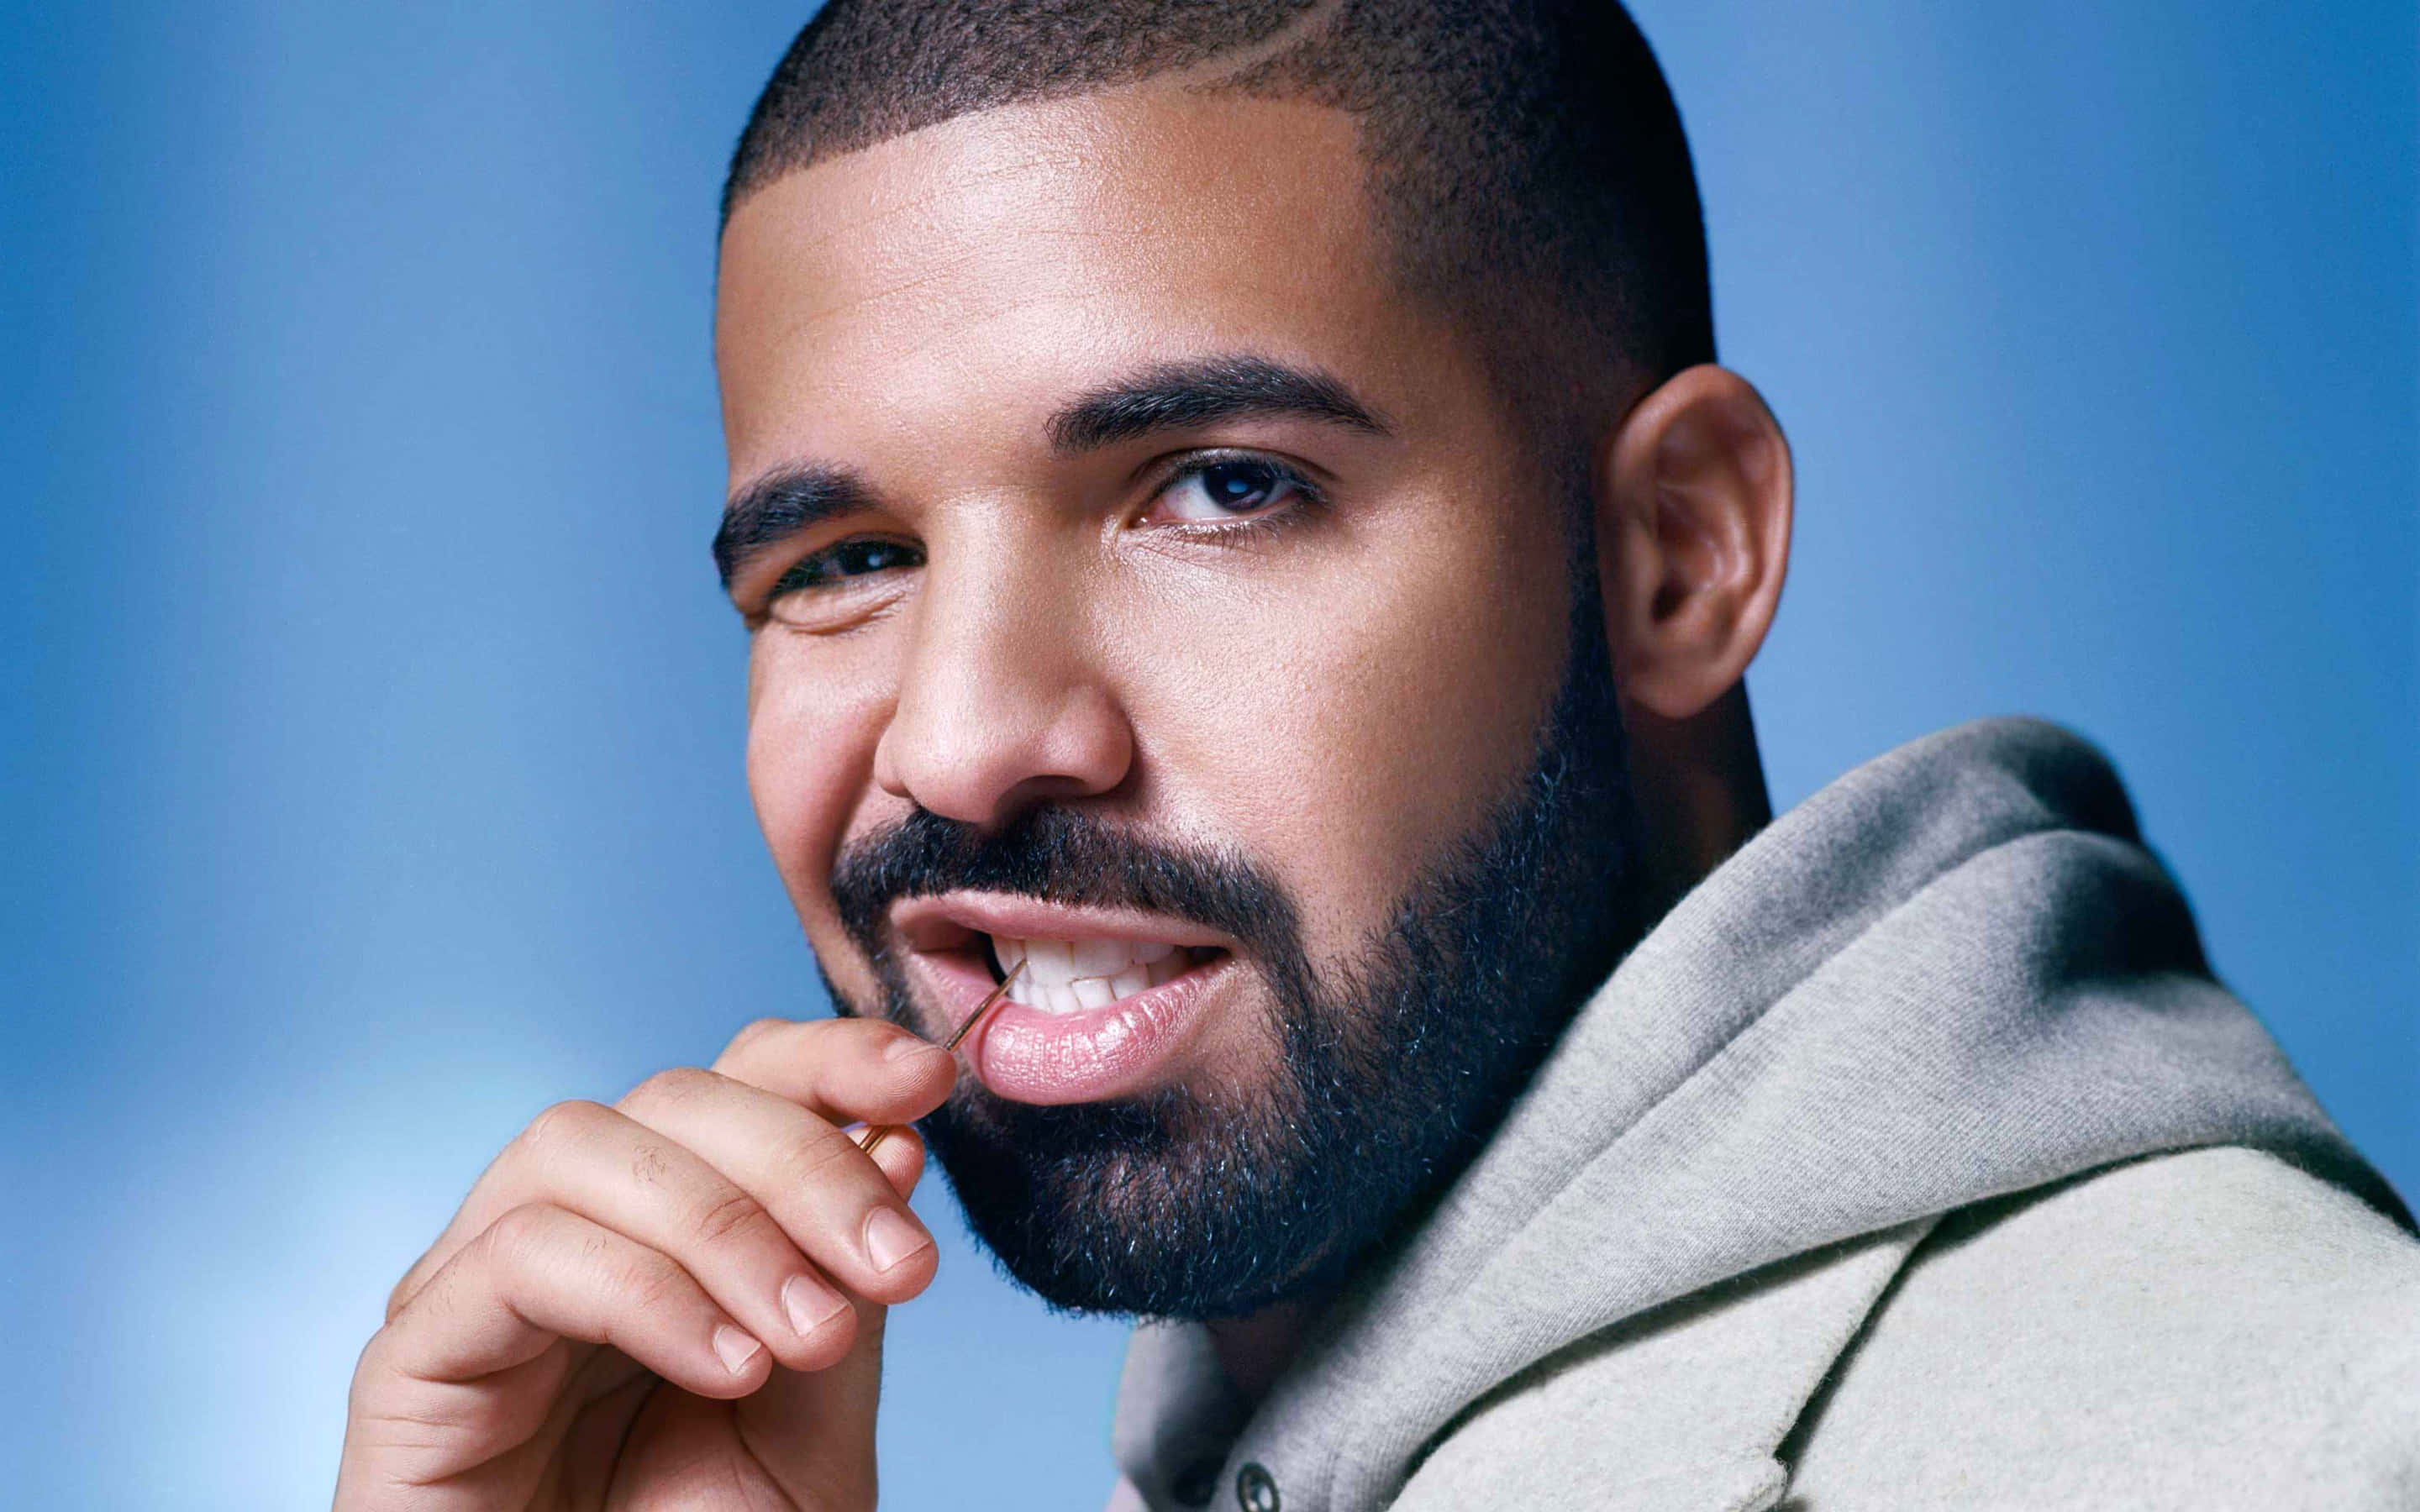 A look inside the mind of one of the world's most popular music artists, Drake. Wallpaper